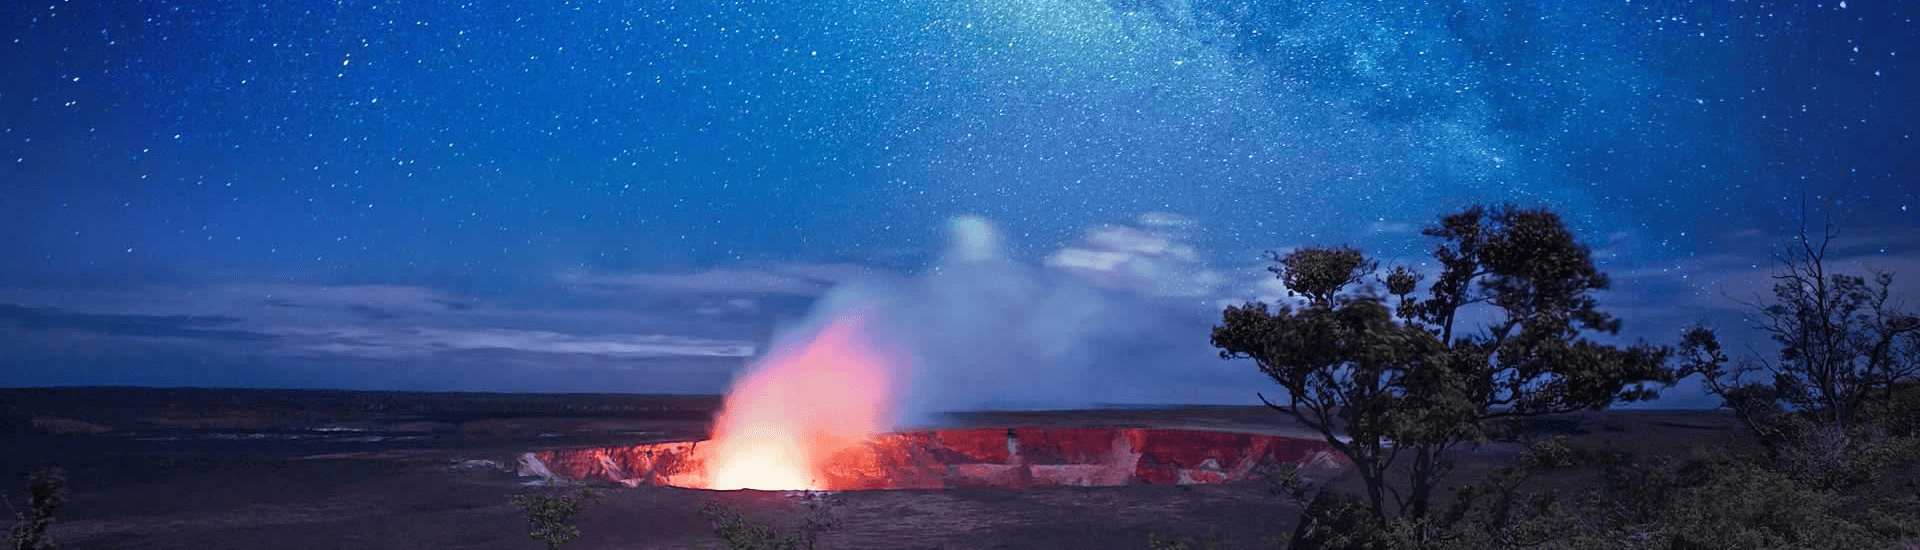 Volcano flaring from the ground against an expanse of the Milky Way